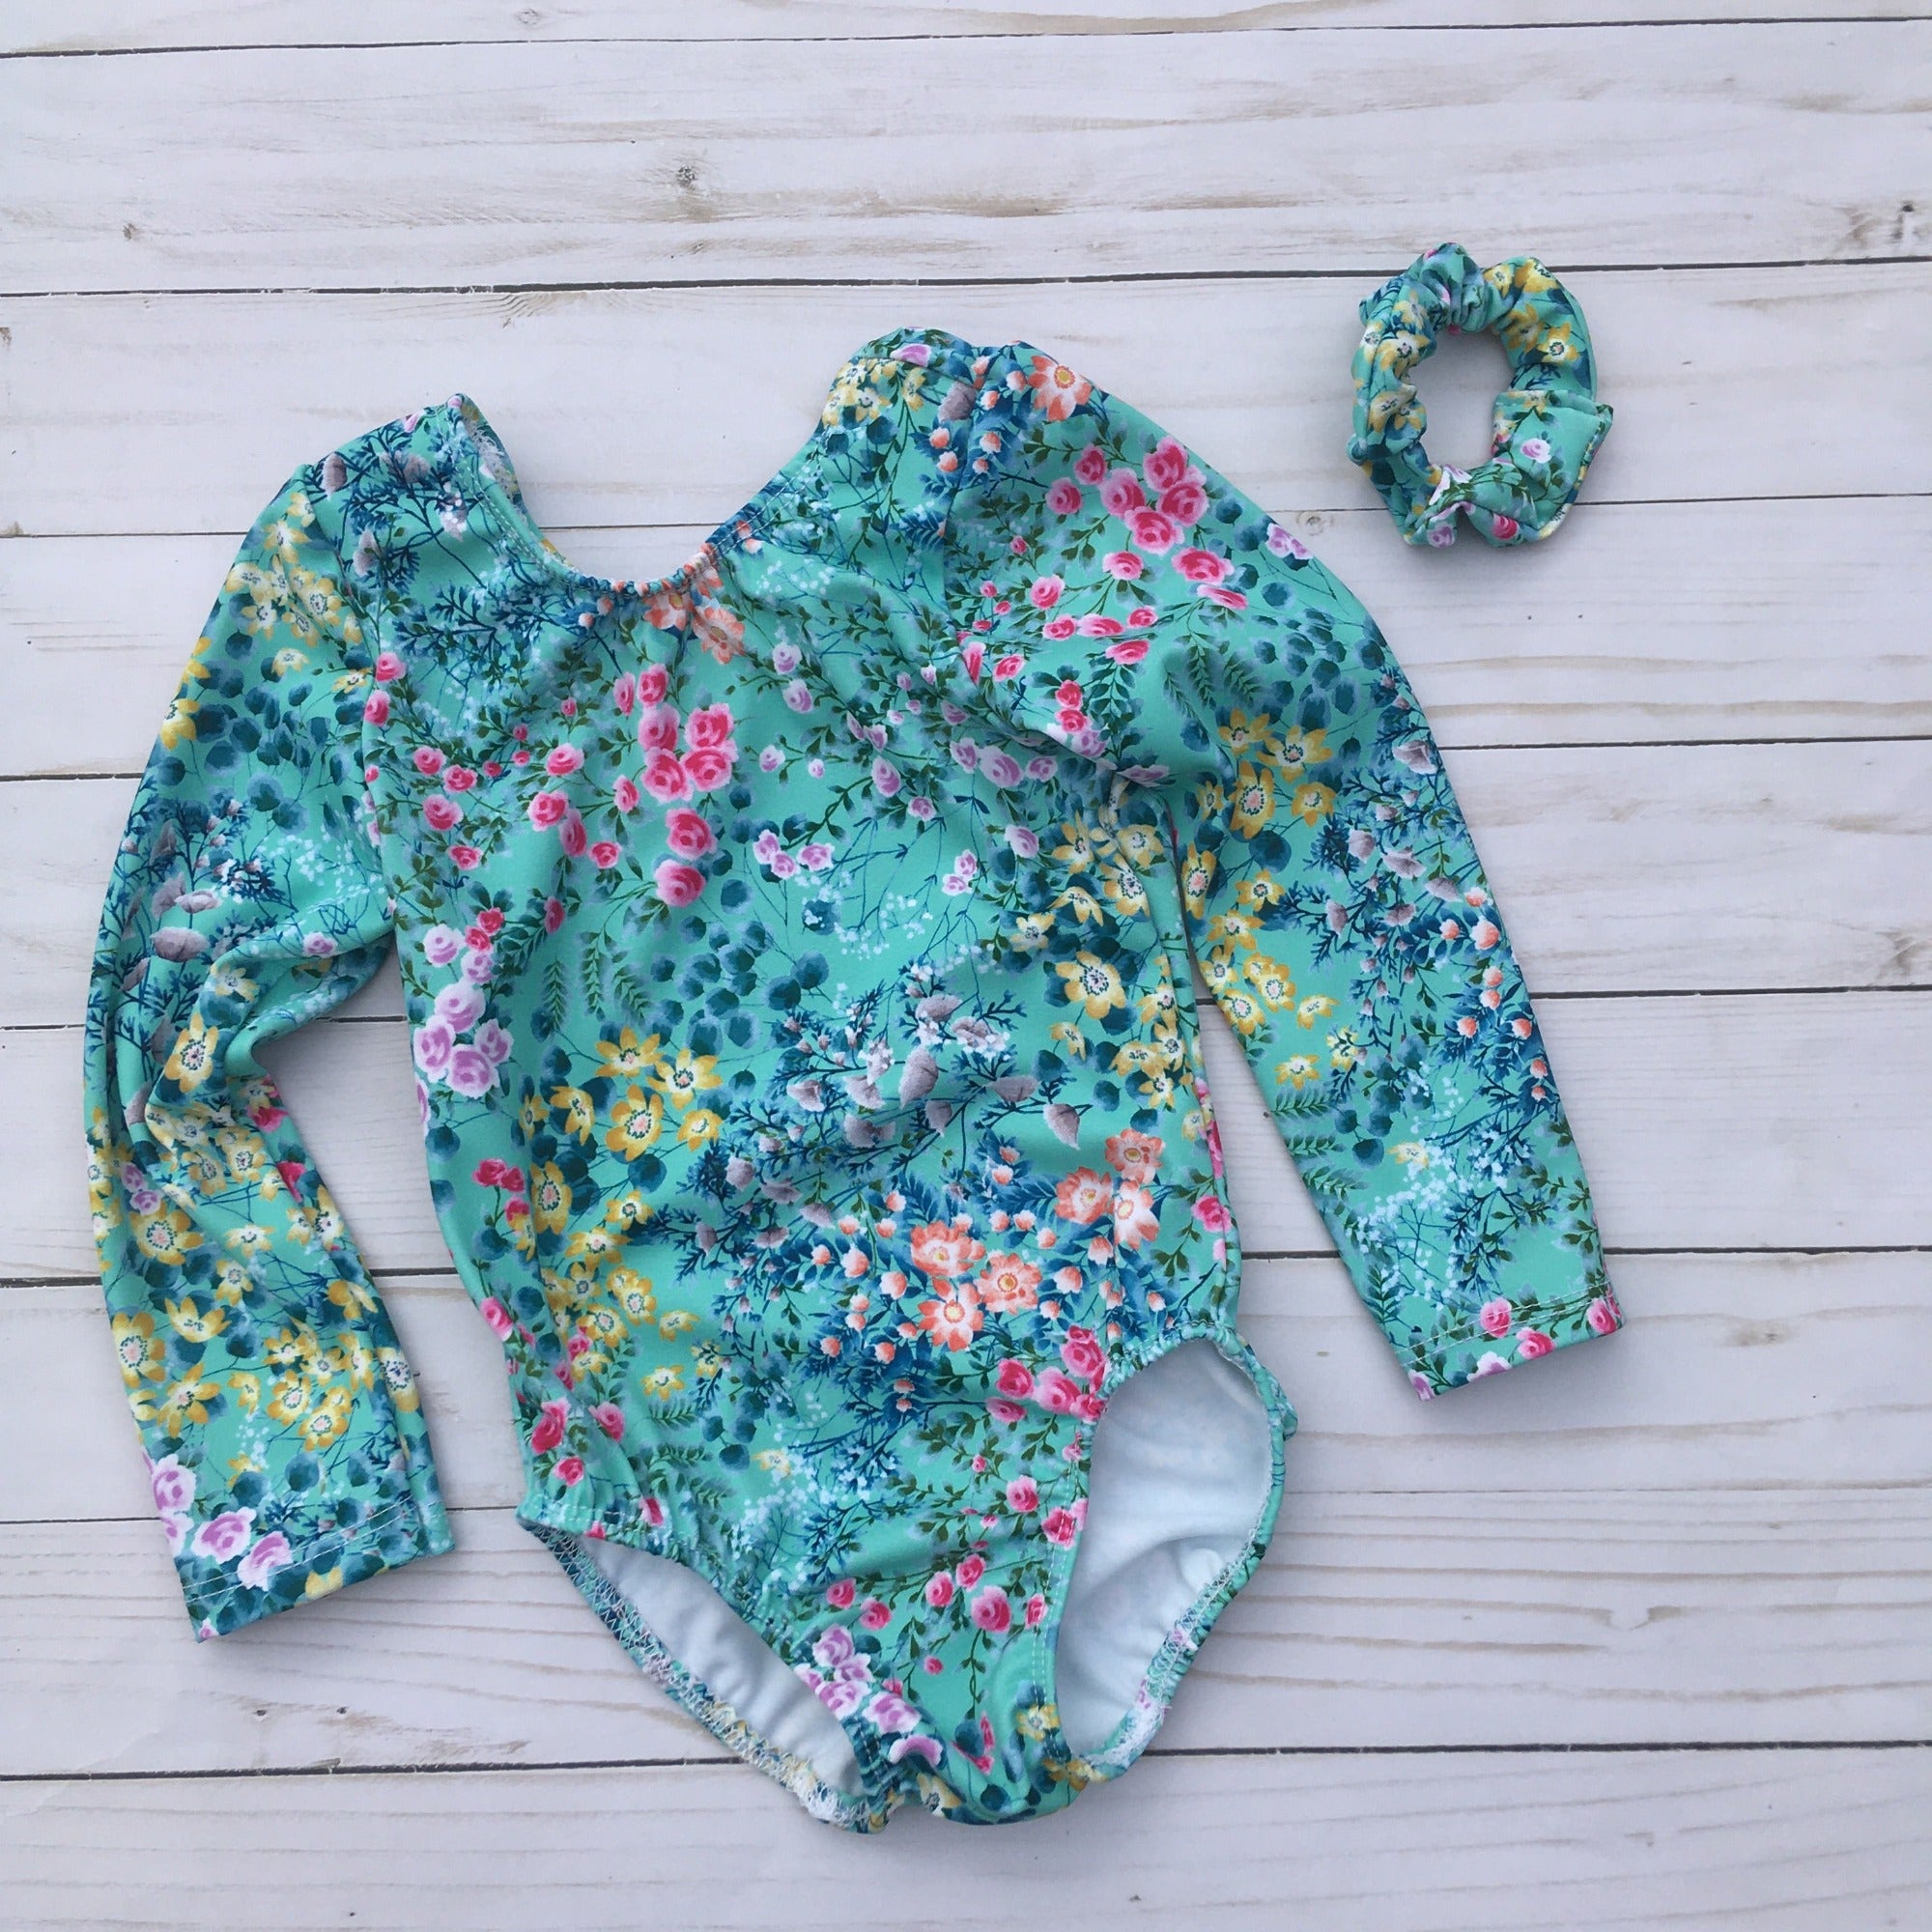 Girls Gymnastics or Dance long sleeve leotard in soft pastel floral pattern on light teal background color. Has a matching hair scrunchie.